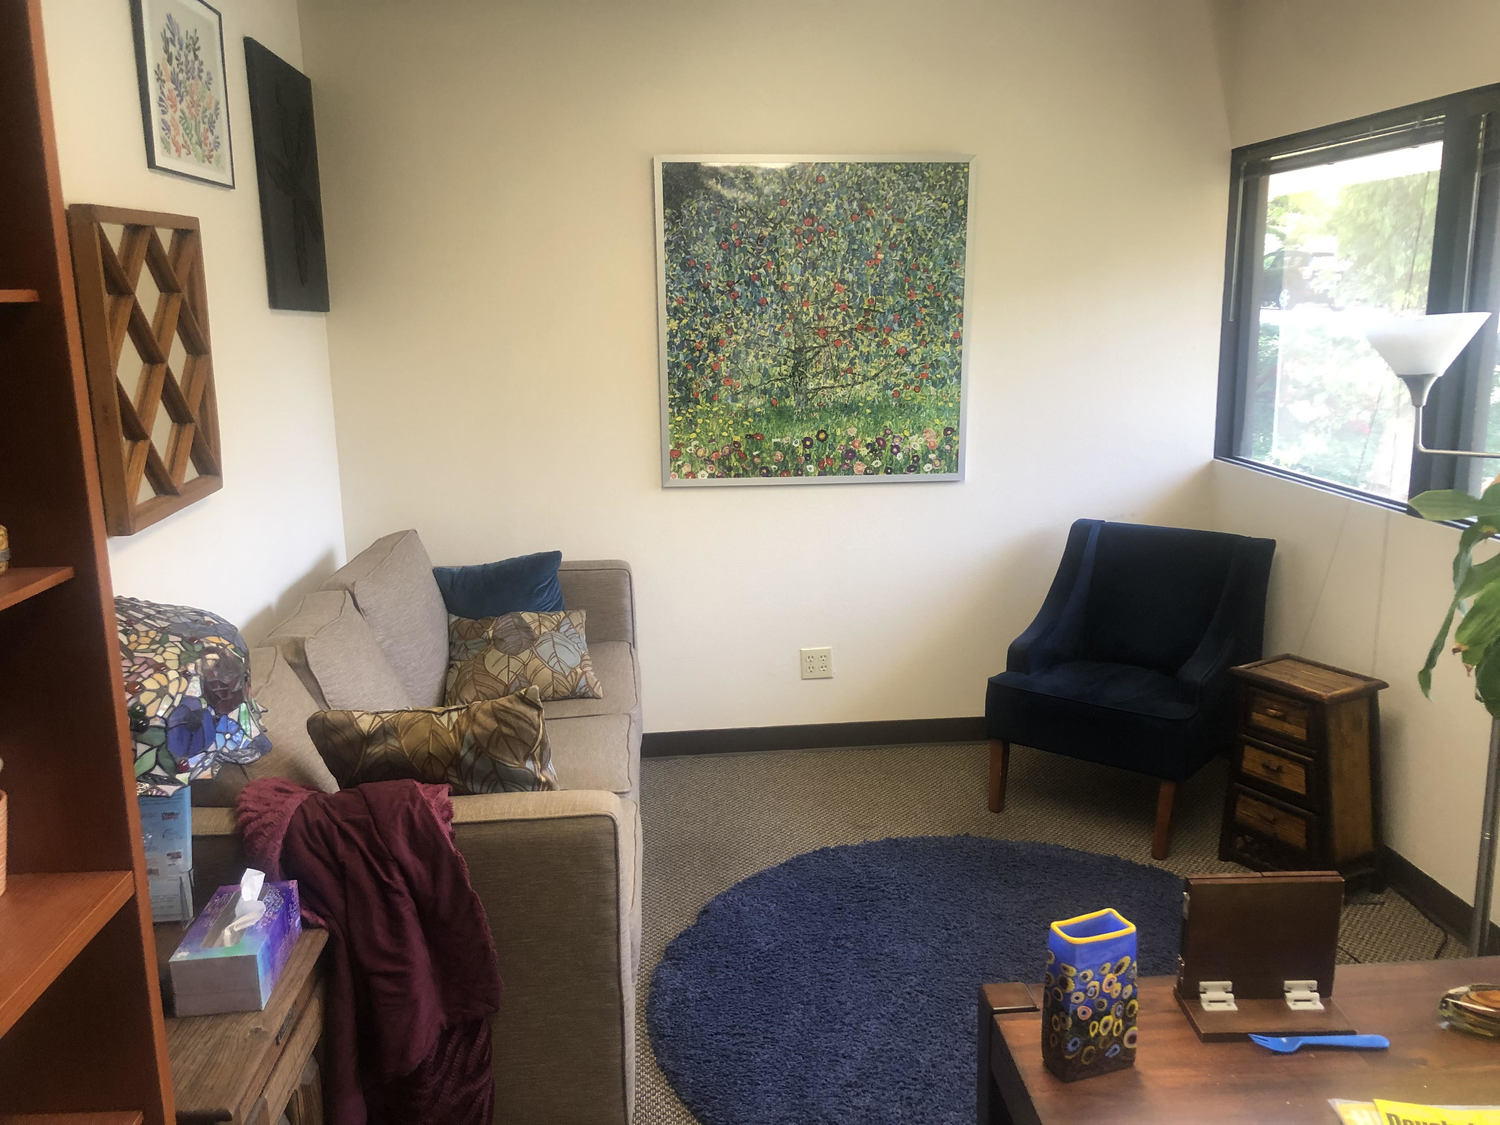 Gallery Photo of This was my personal office. However, the pandemic changed that. I have since found out that my clients love teletherapy in their own space.